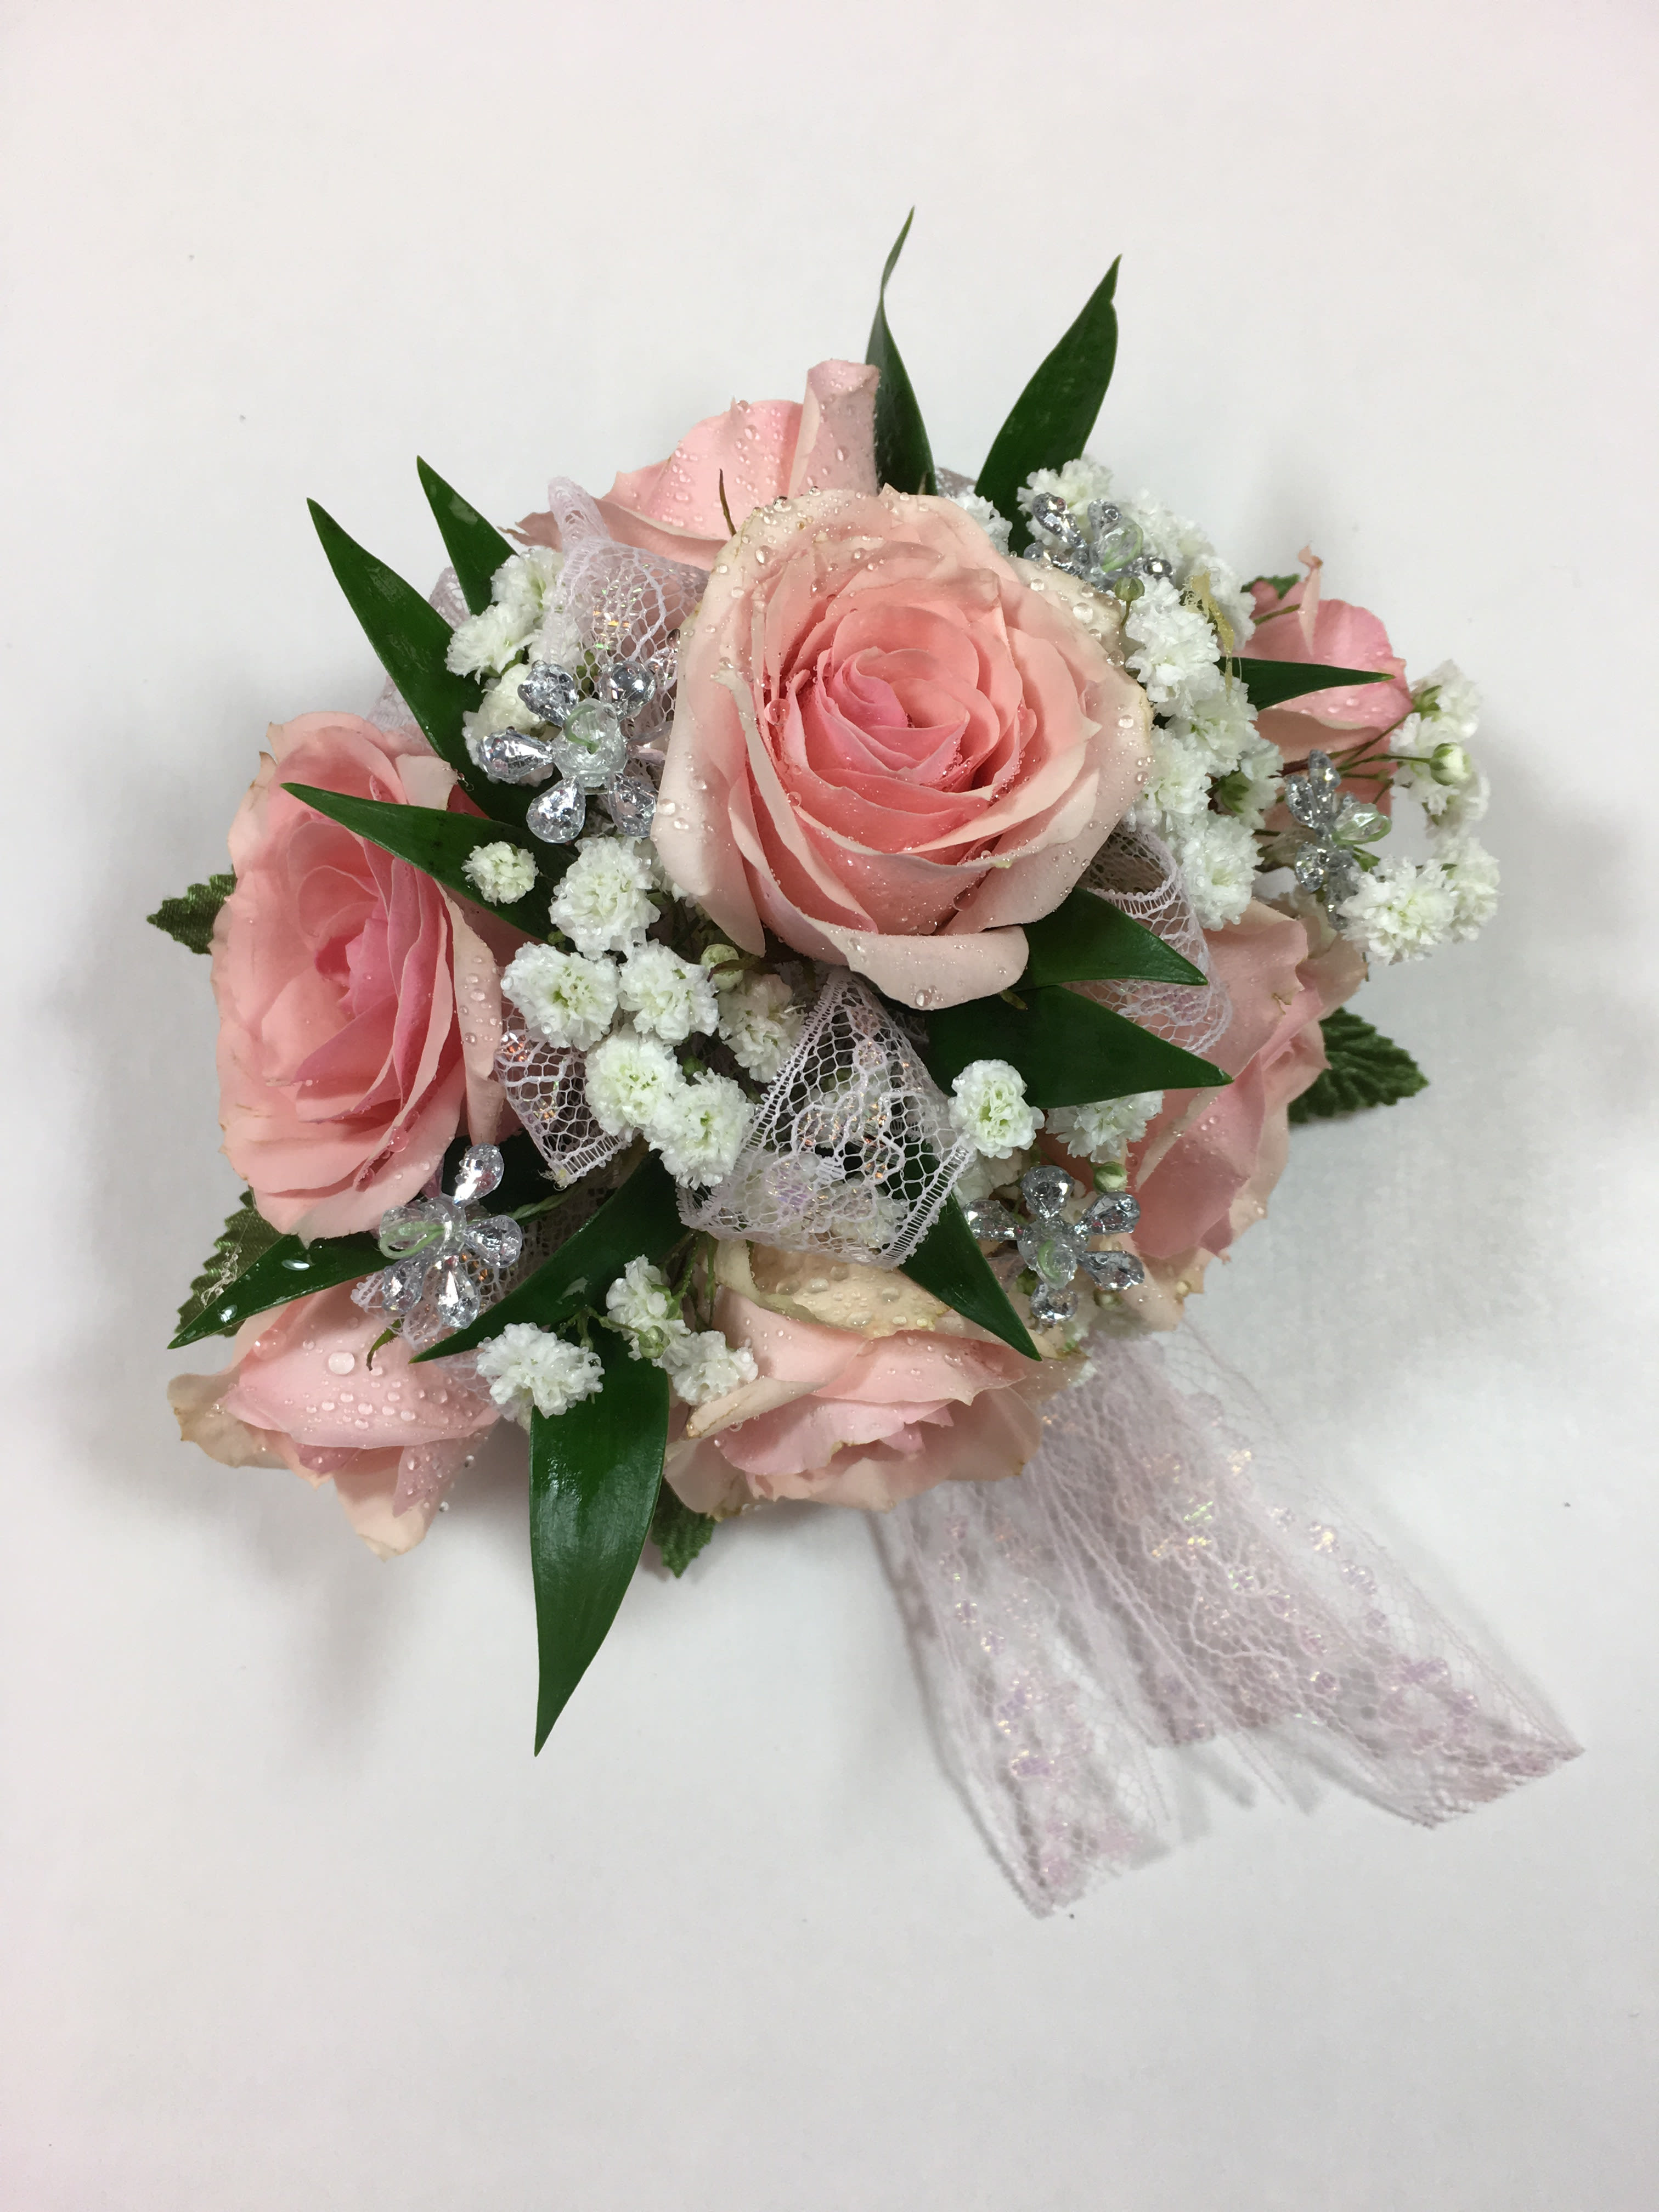 W3 Spray Rose Wrist Corsage  - Delicate feminine design with lace ribbon.  Spray roses are the focus of this design.  Pictured with silver jewels.   Each corsage is customized to go with her beautiful dress.  Want to make your date's night? Add a lovely keepsake bracelet! 